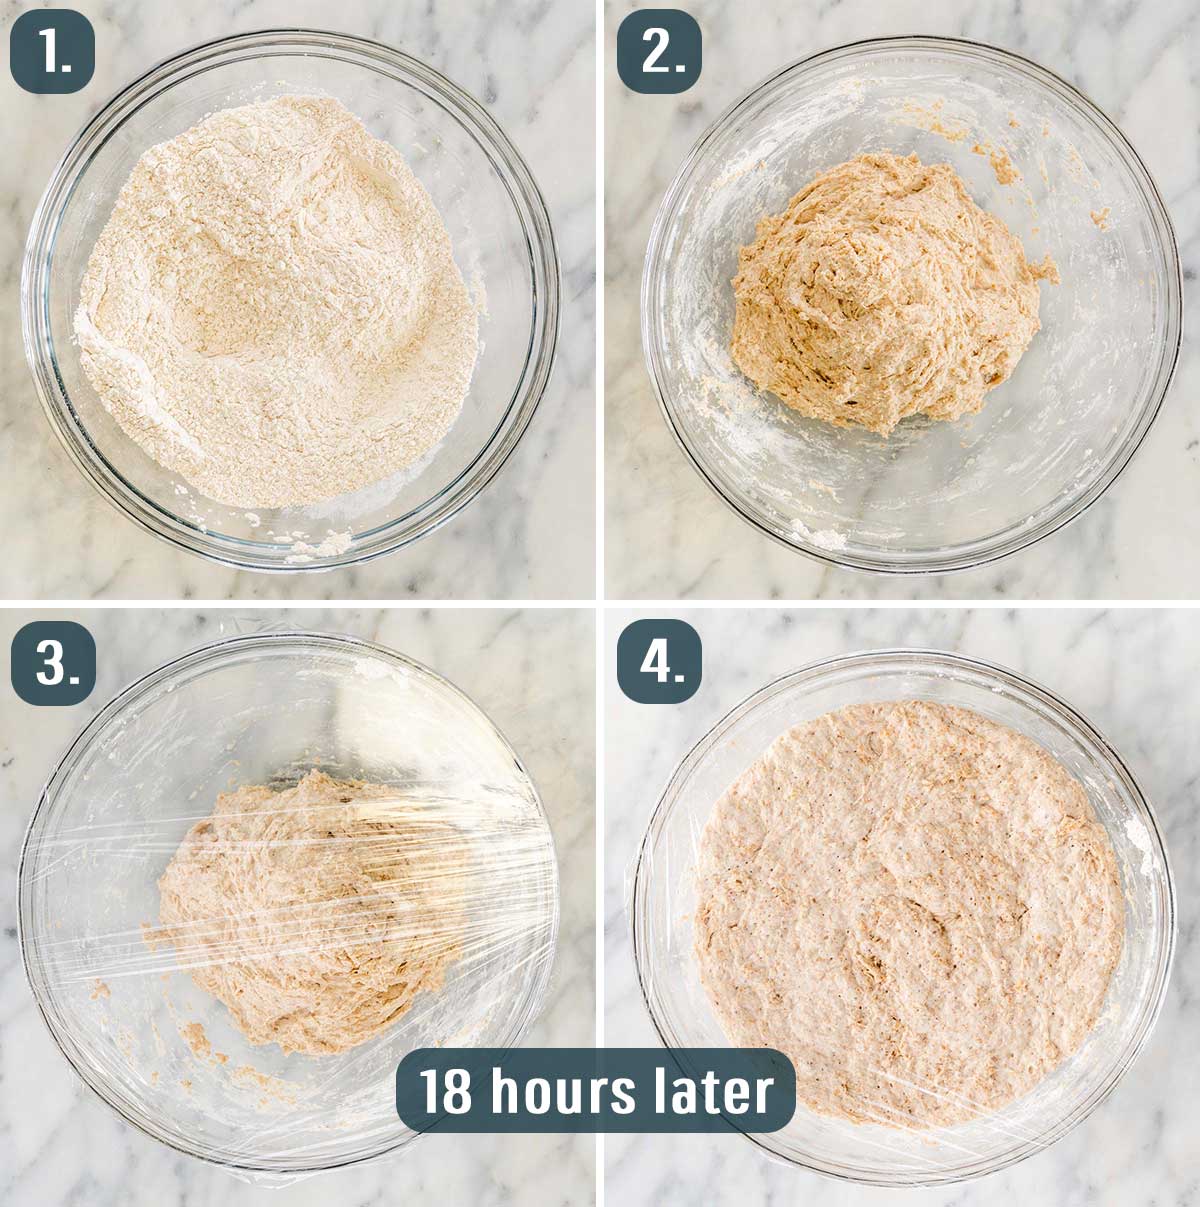 process shots showing how to make the dough for no knead whole wheat bread.